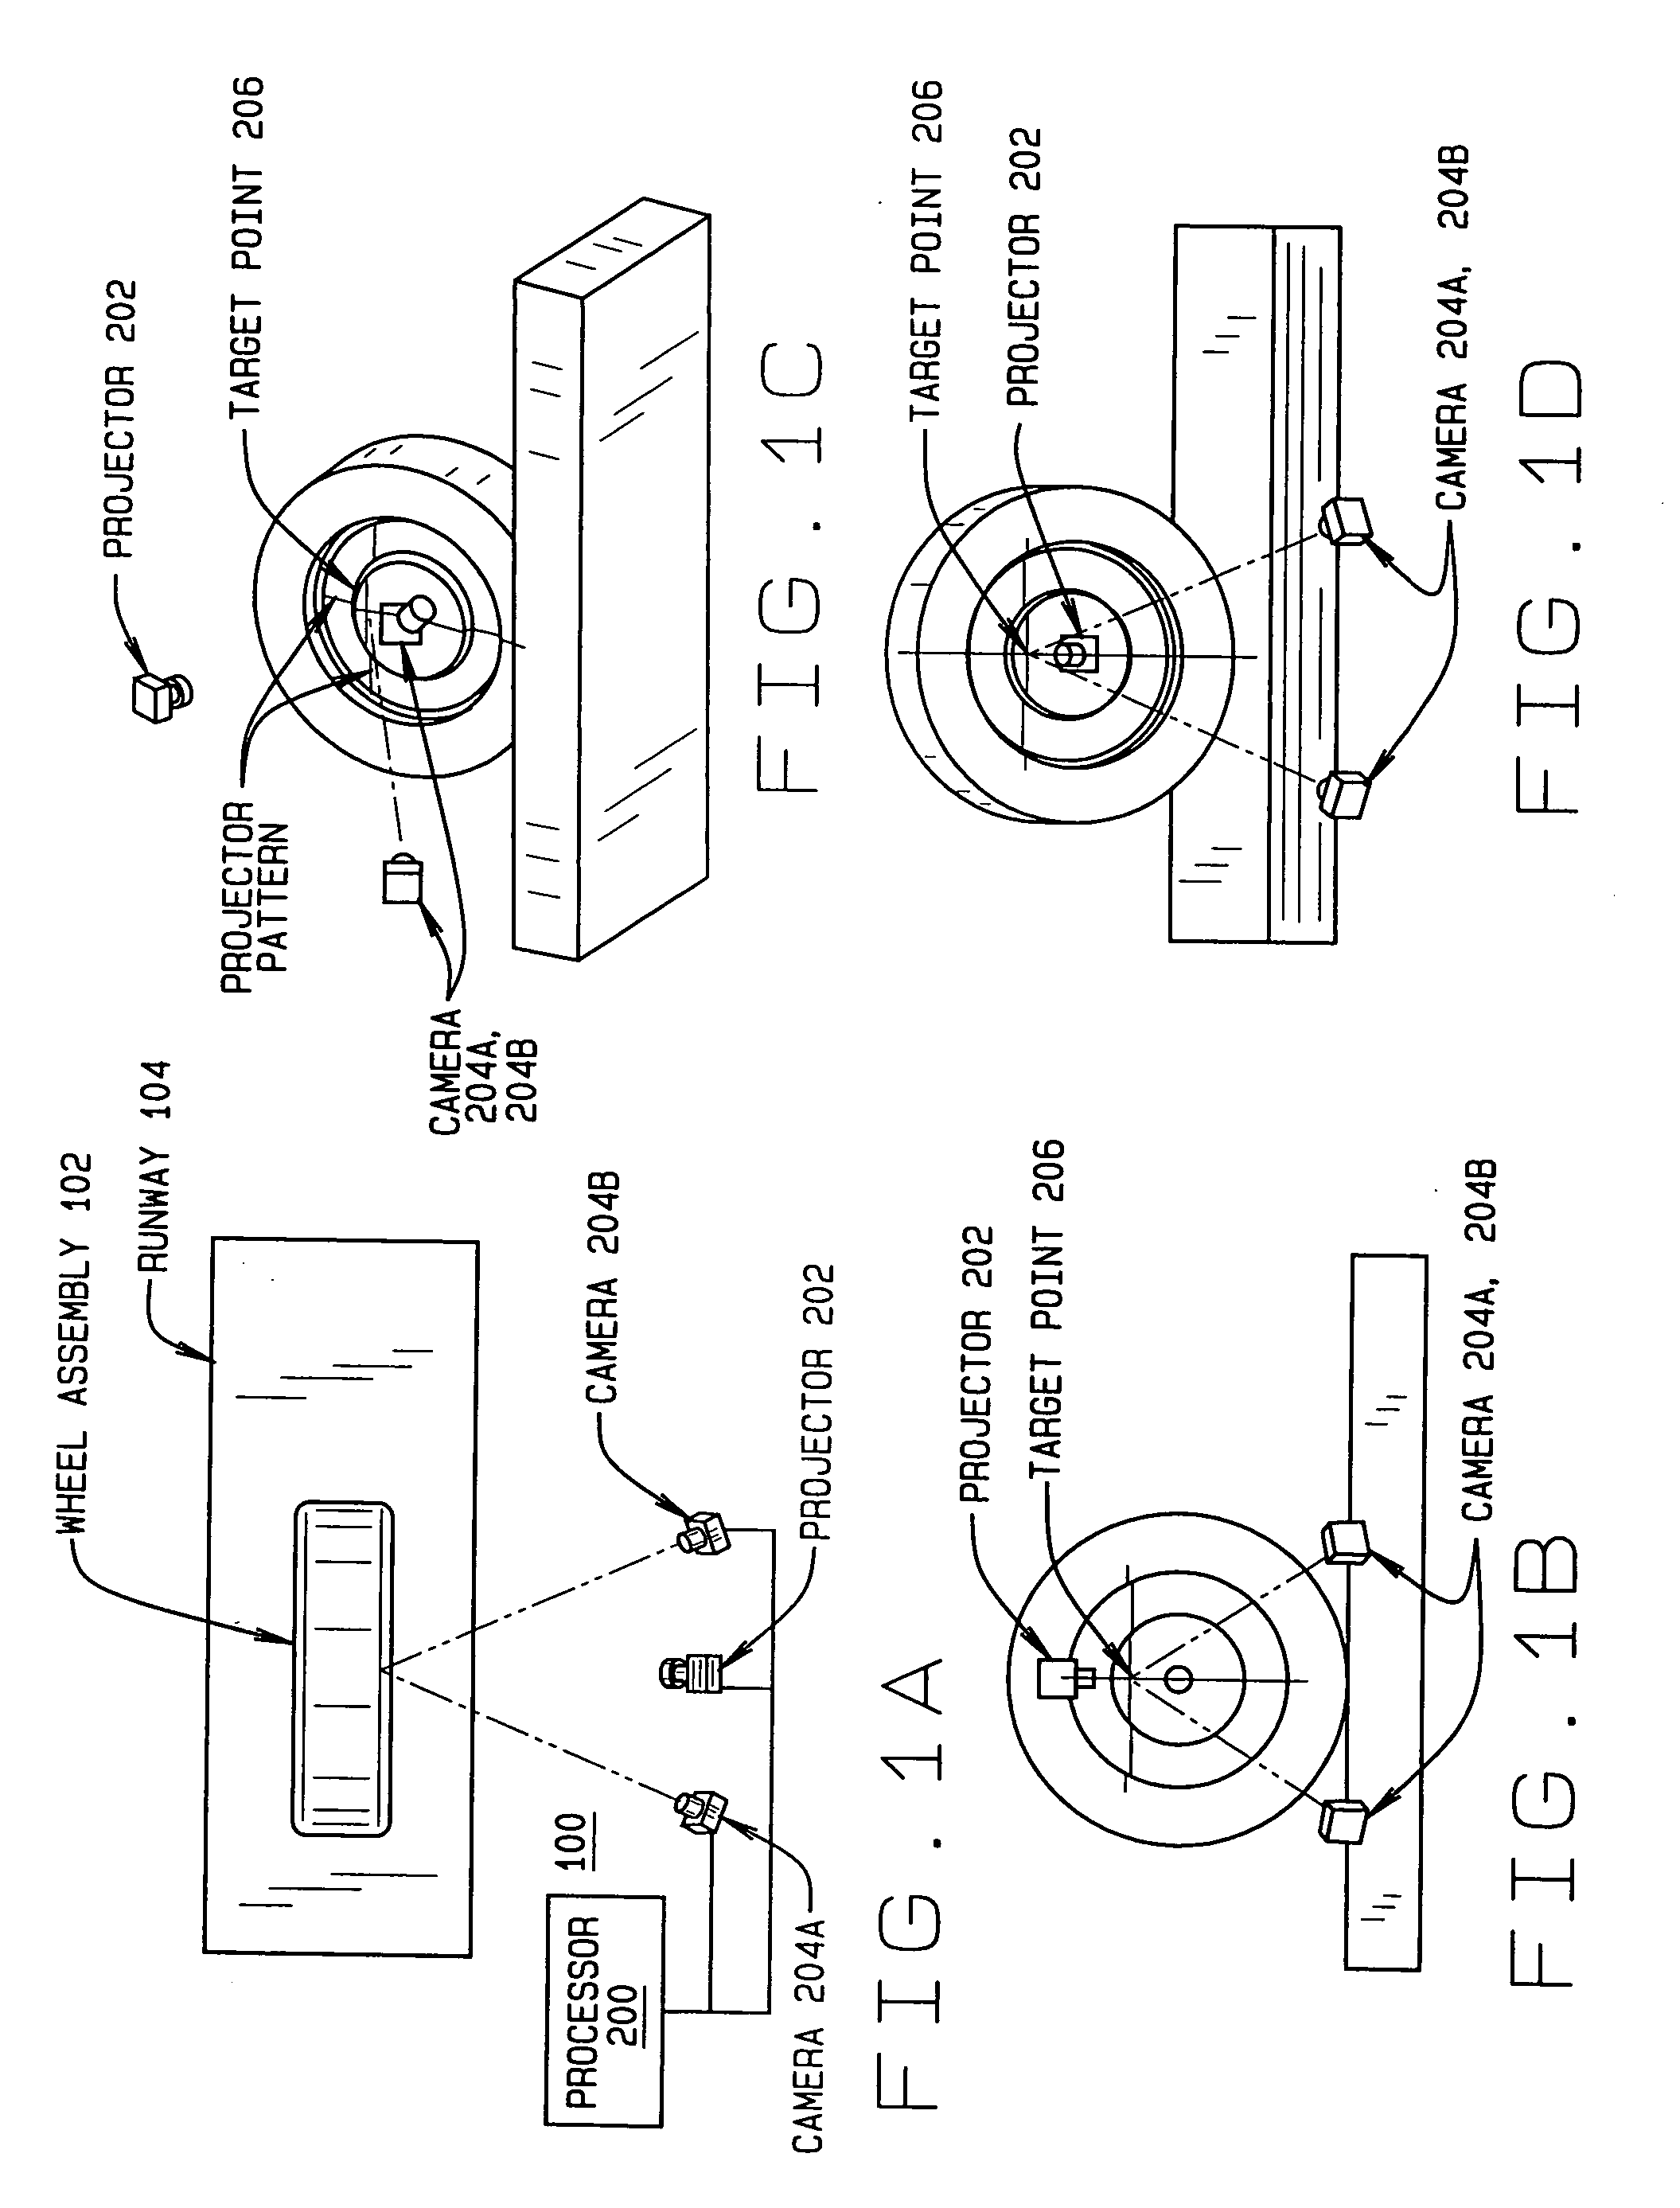 Method and Apparatus for Wheel Alignment System Target Projection and Illumination